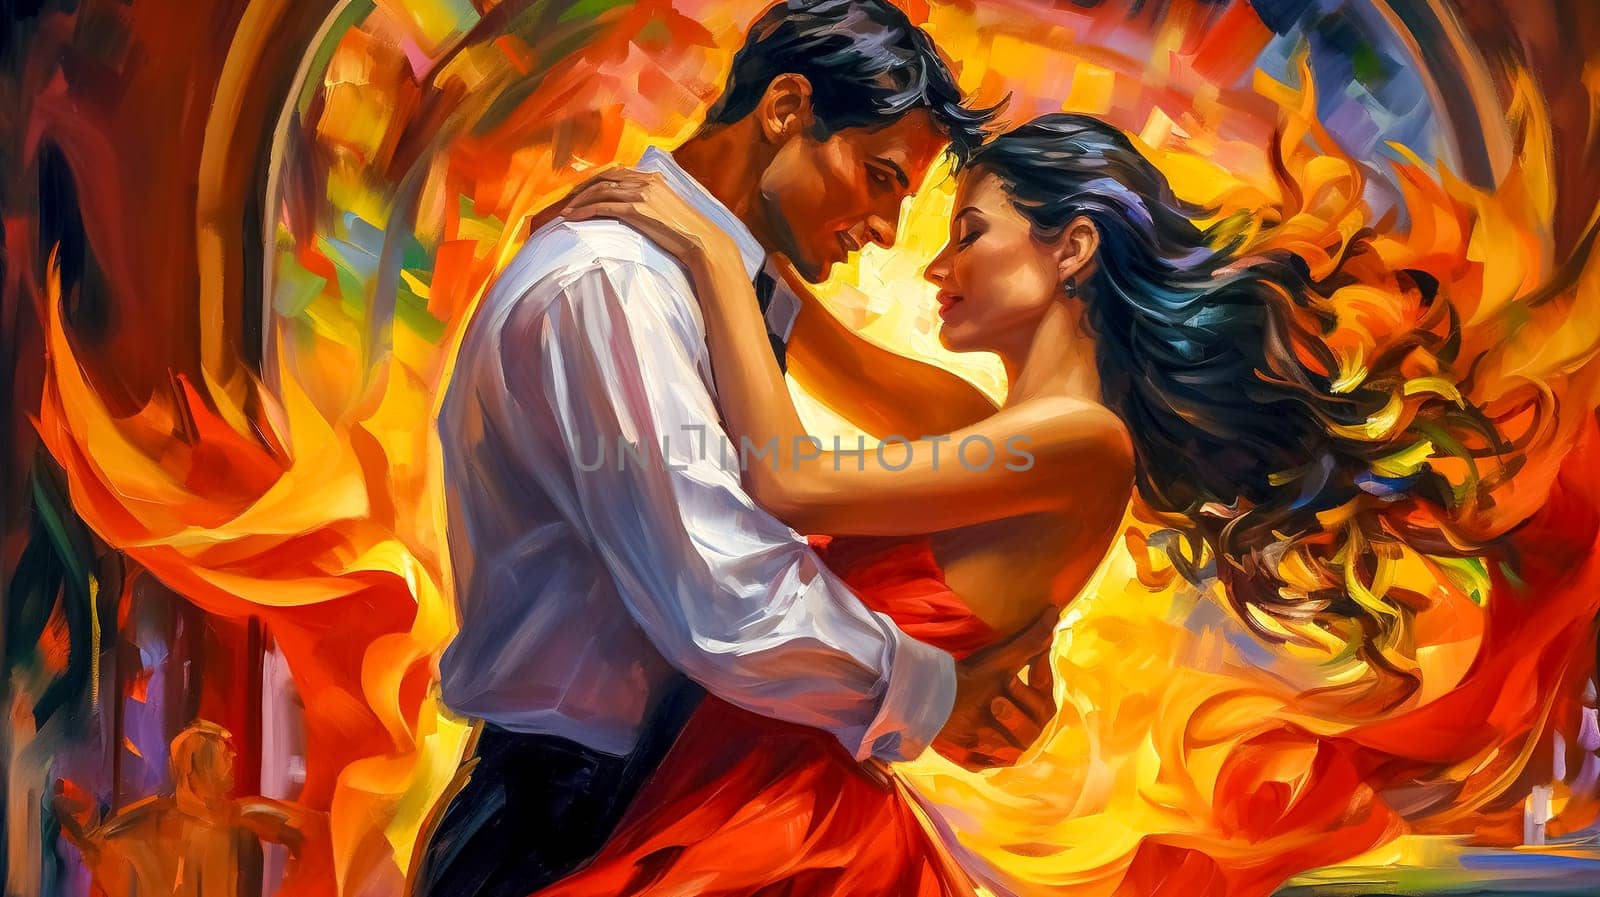 Passionate dance of a couple enveloped in the fiery hues of Latin rhythm